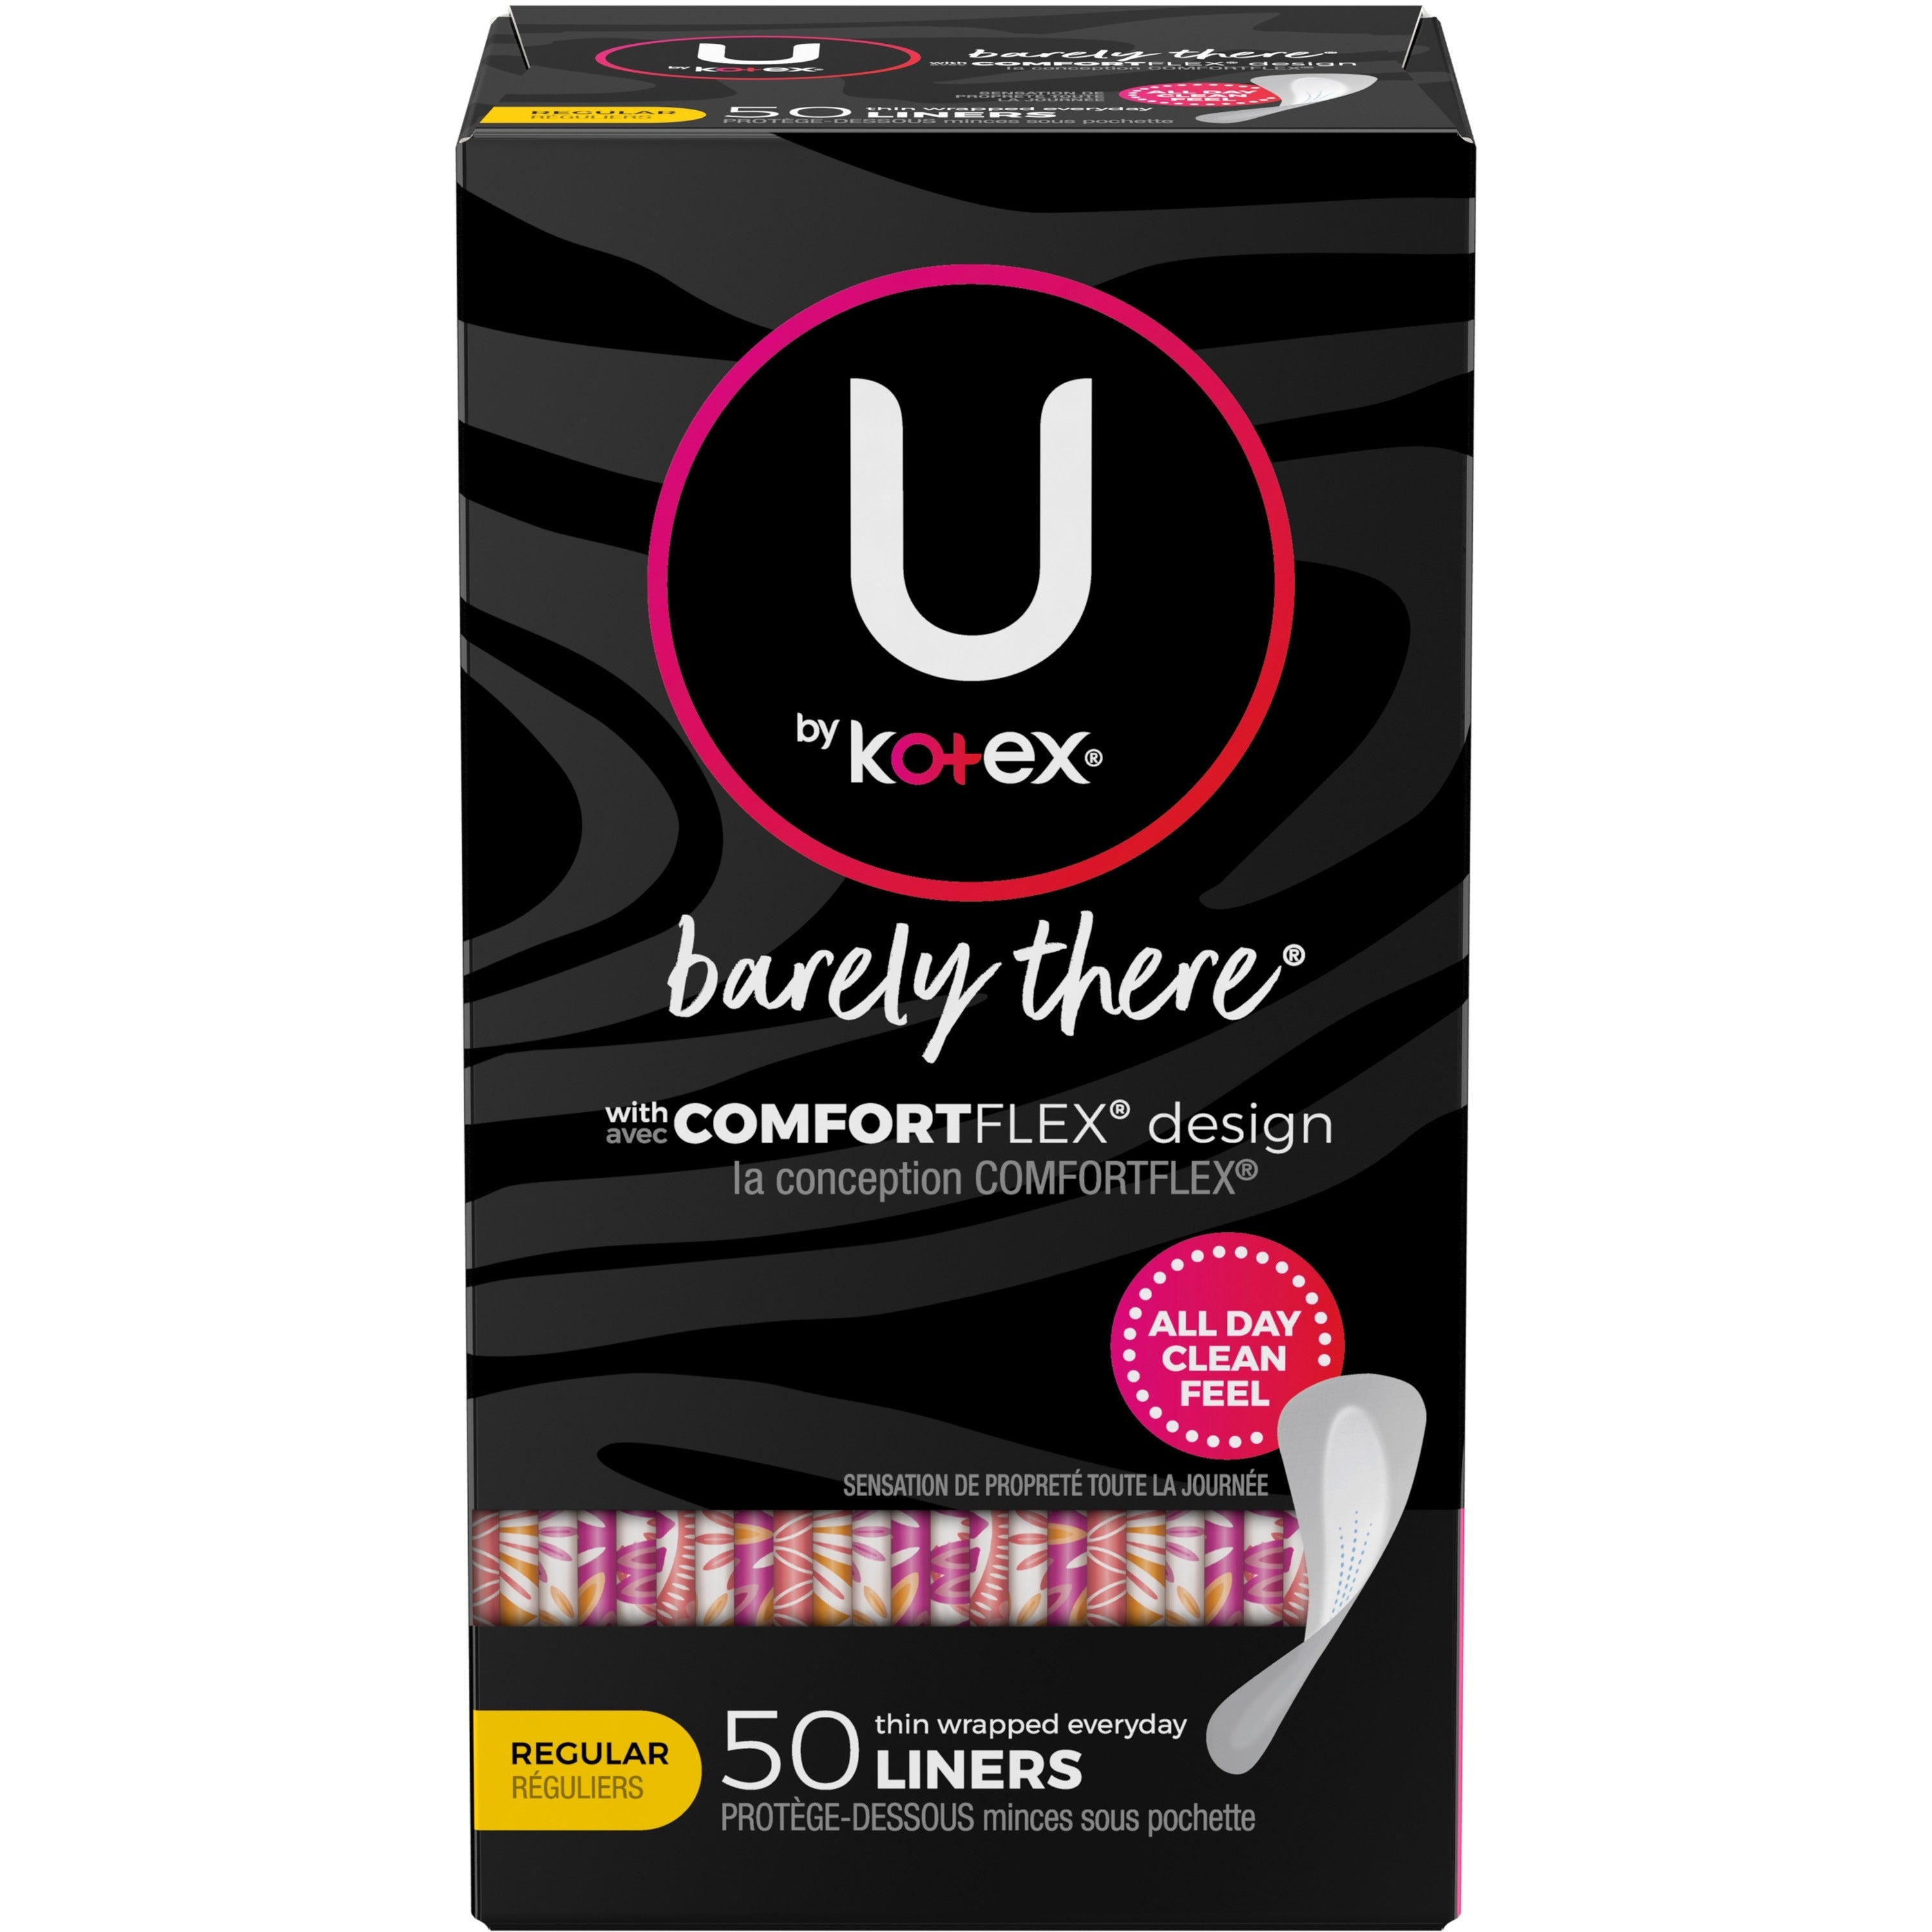 u-by-kotex-barely-there-panty-liner-1-each-individually-wrapped_kcc42489 - 2